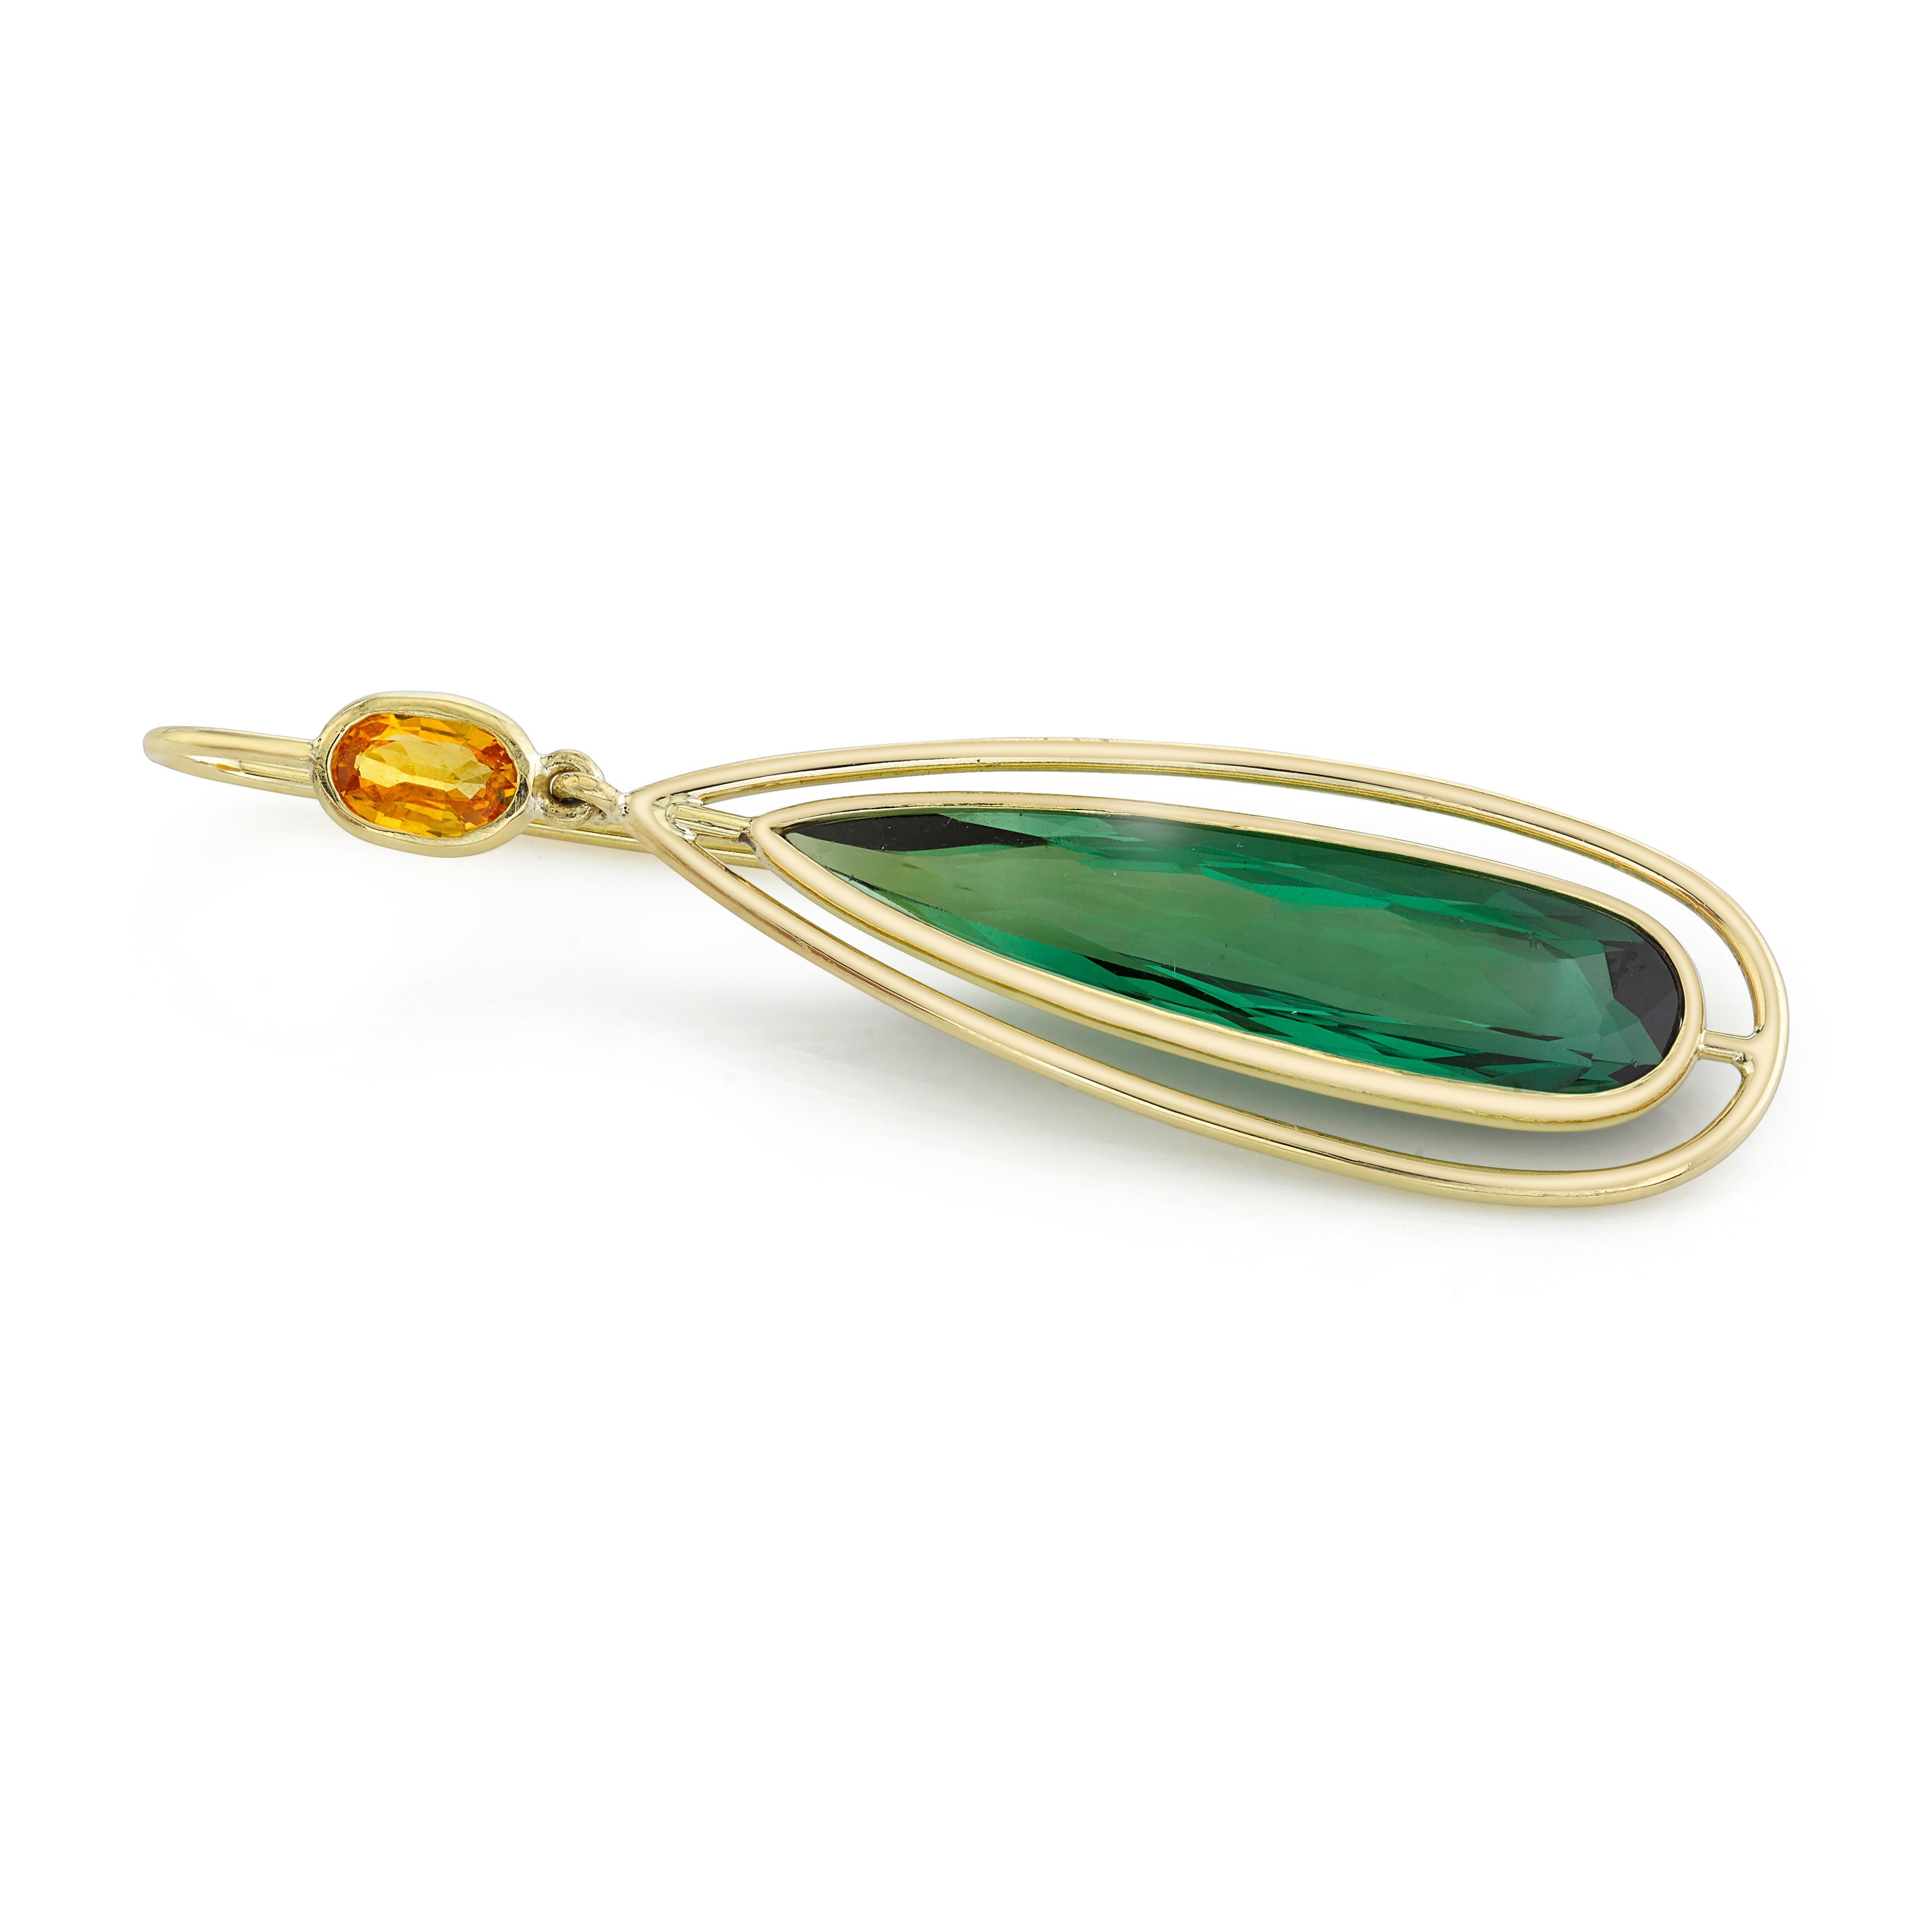 Elegant, elongated green tourmaline pears are featured in these beautiful 18k yellow gold dangle earrings. The tourmalines are perfectly matched, with a rich, slightly bluish green color and a very high level of clarity. Sparkly yellow sapphires